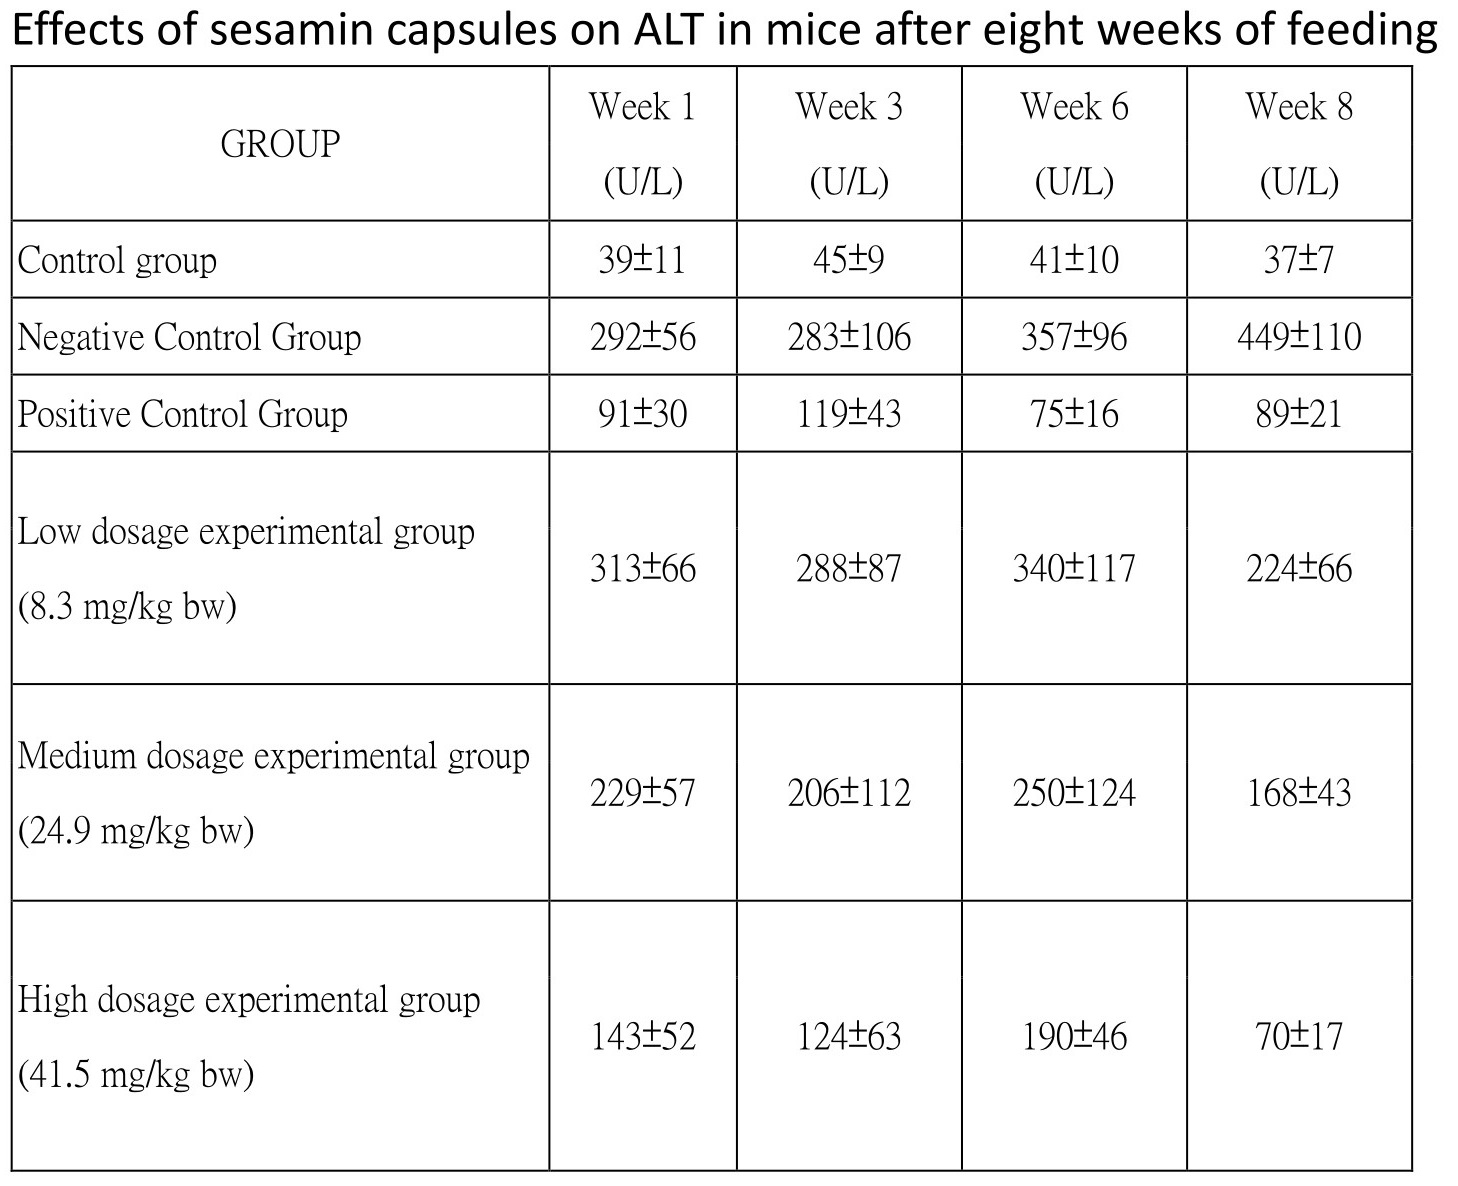 Effects of sesamin capsules on ALT in mice after eight weeks of feeding